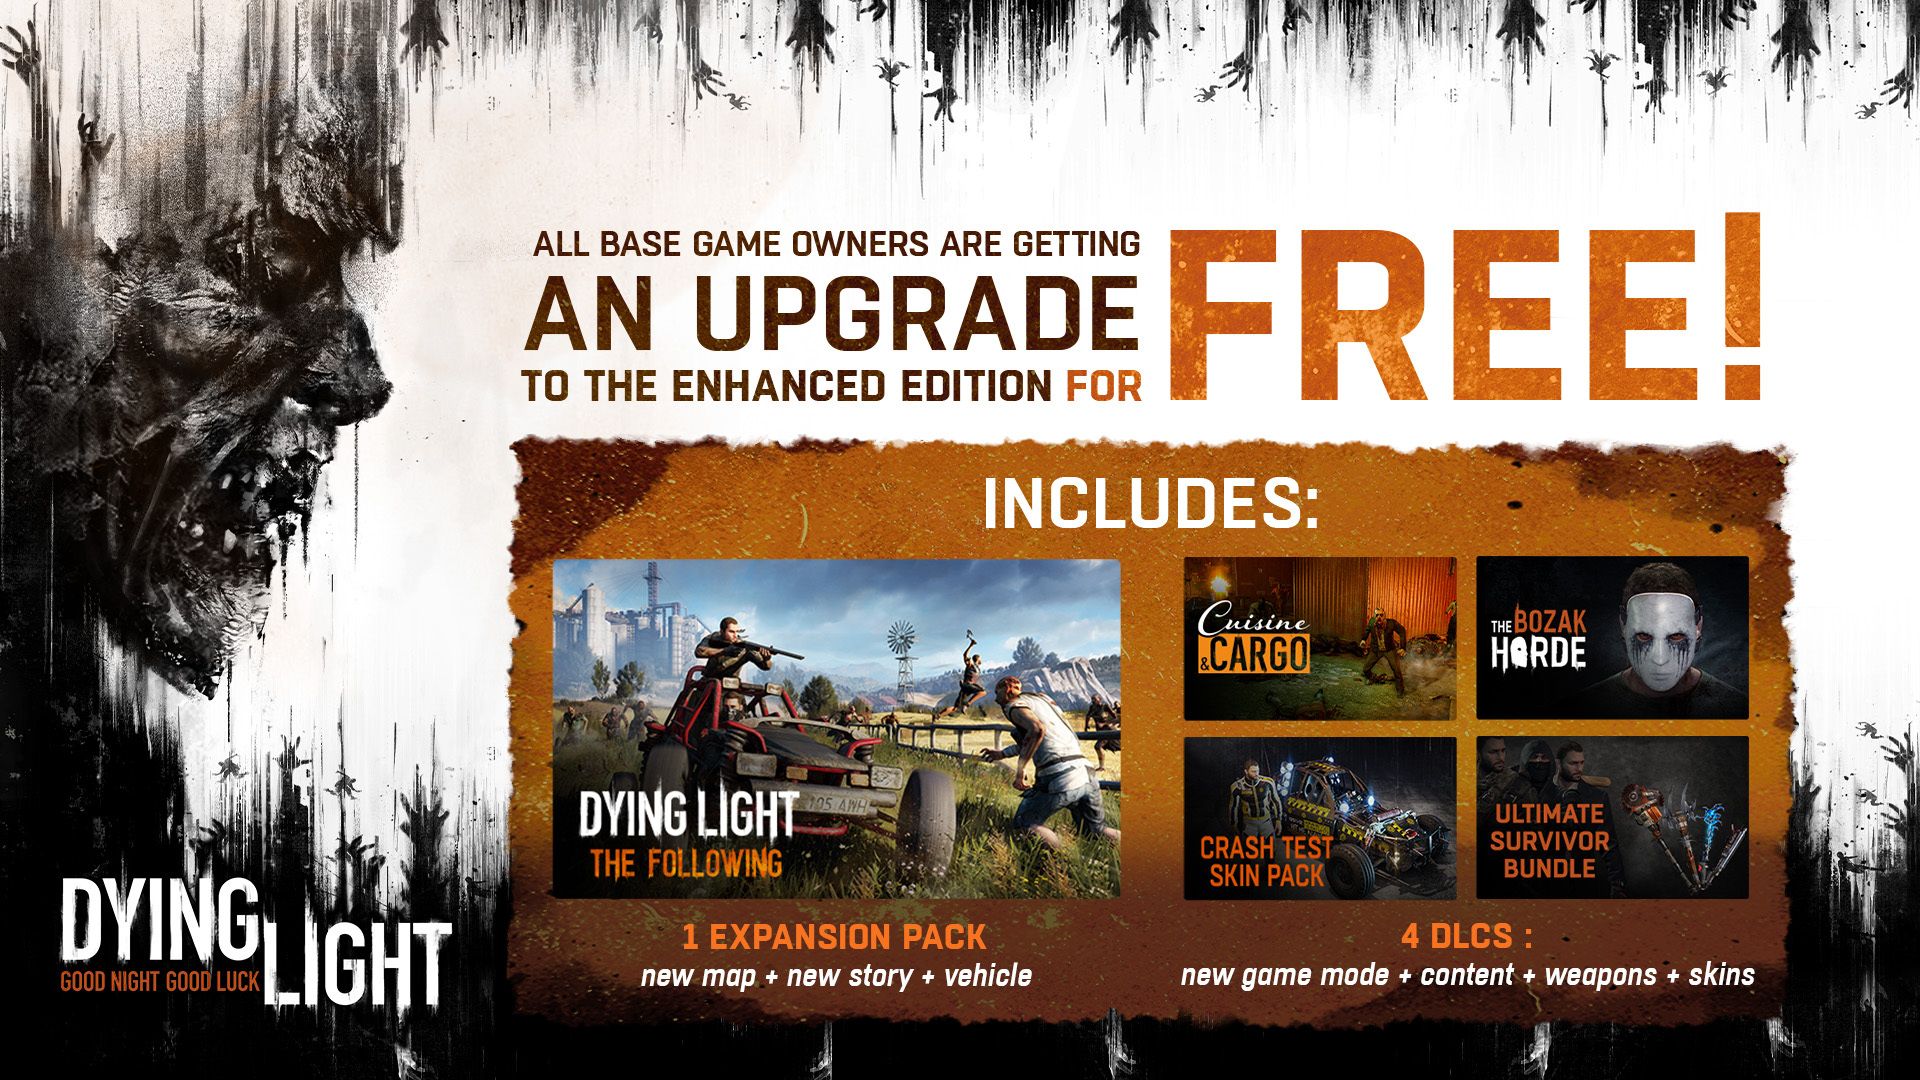 Dying Light Update New Weapon, Enhanced Game, and Balancing Changes